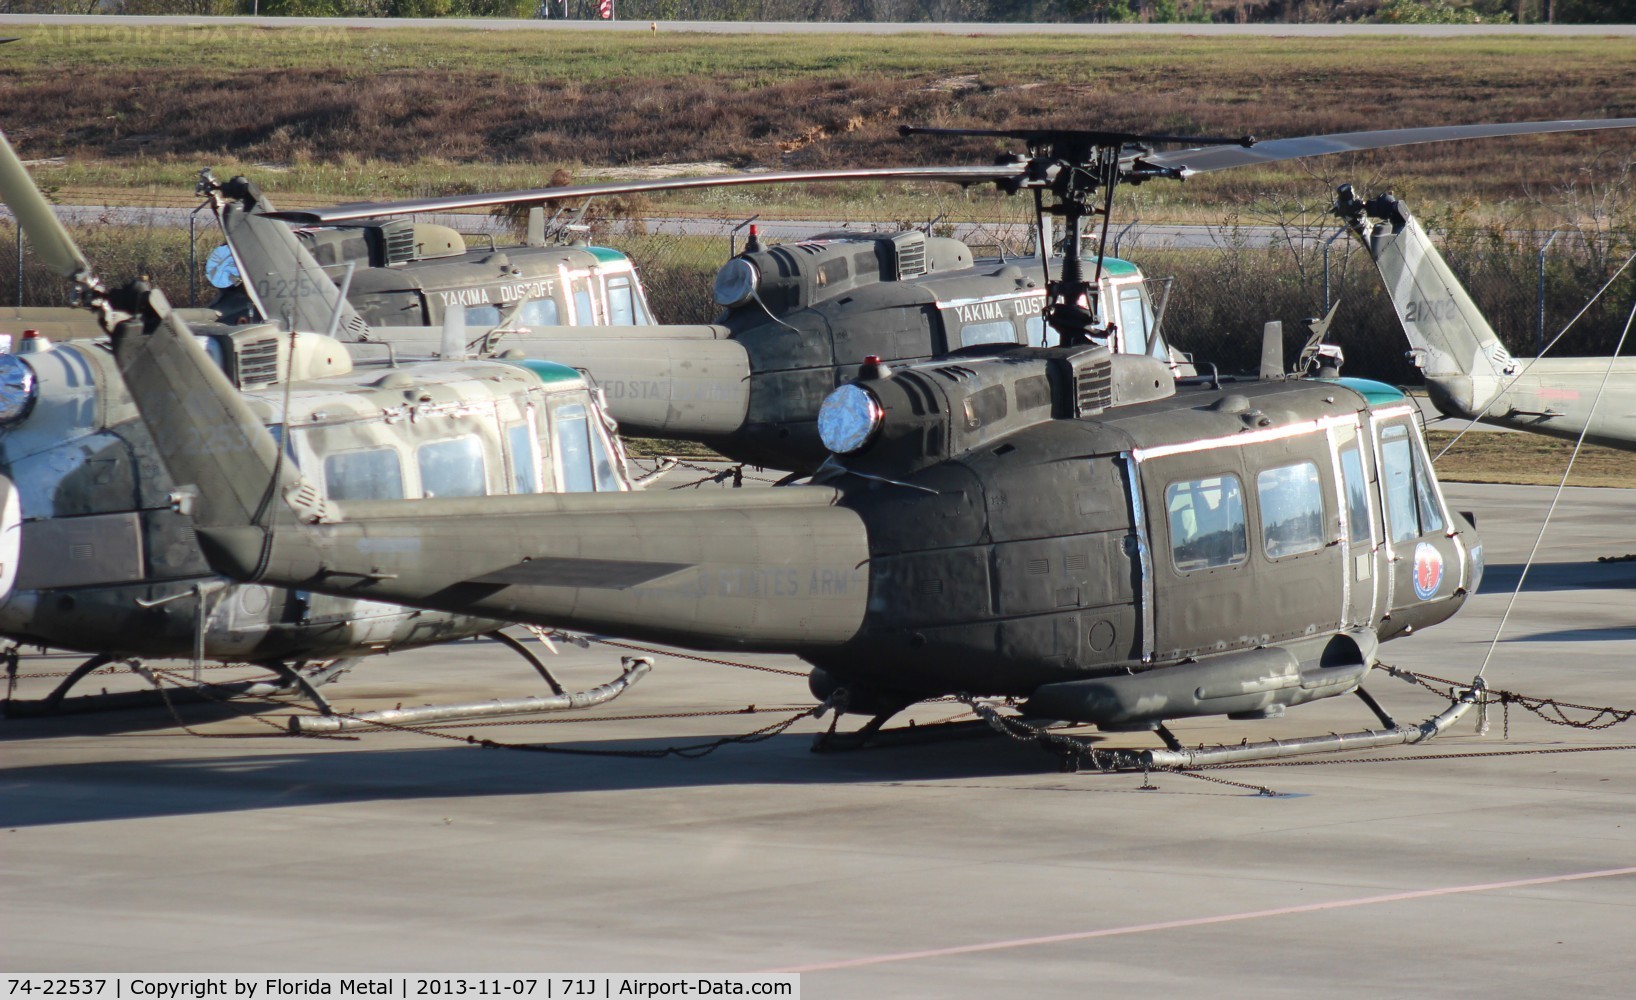 74-22537, 1974 Bell UH-1H Iroquois C/N 13861, UH-1H